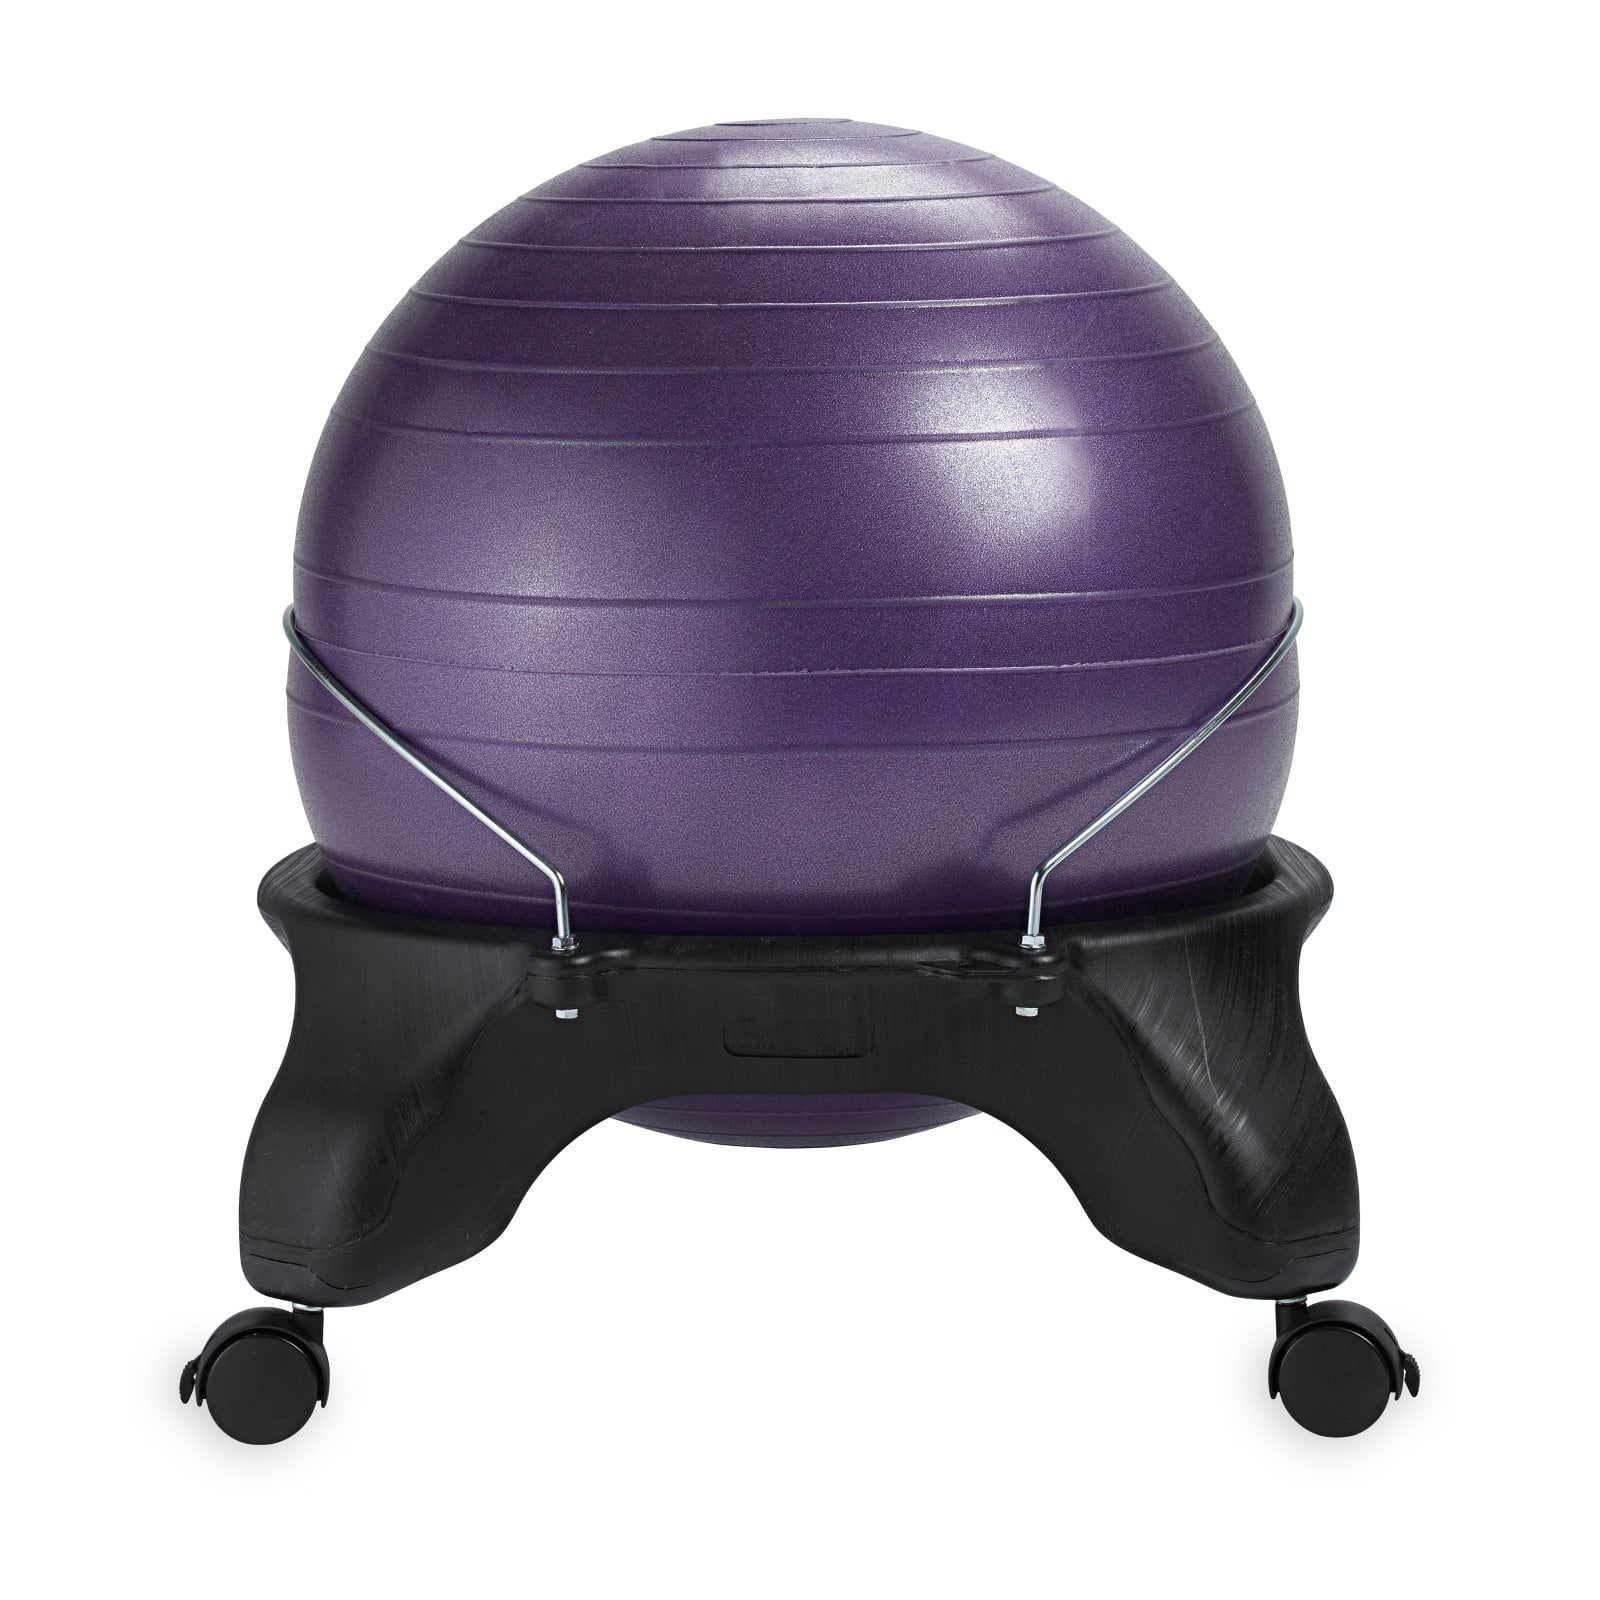 Gaiam Kids Stay-N-Play Children's Inflatable Balance Ball Desk Chair With Stabil 